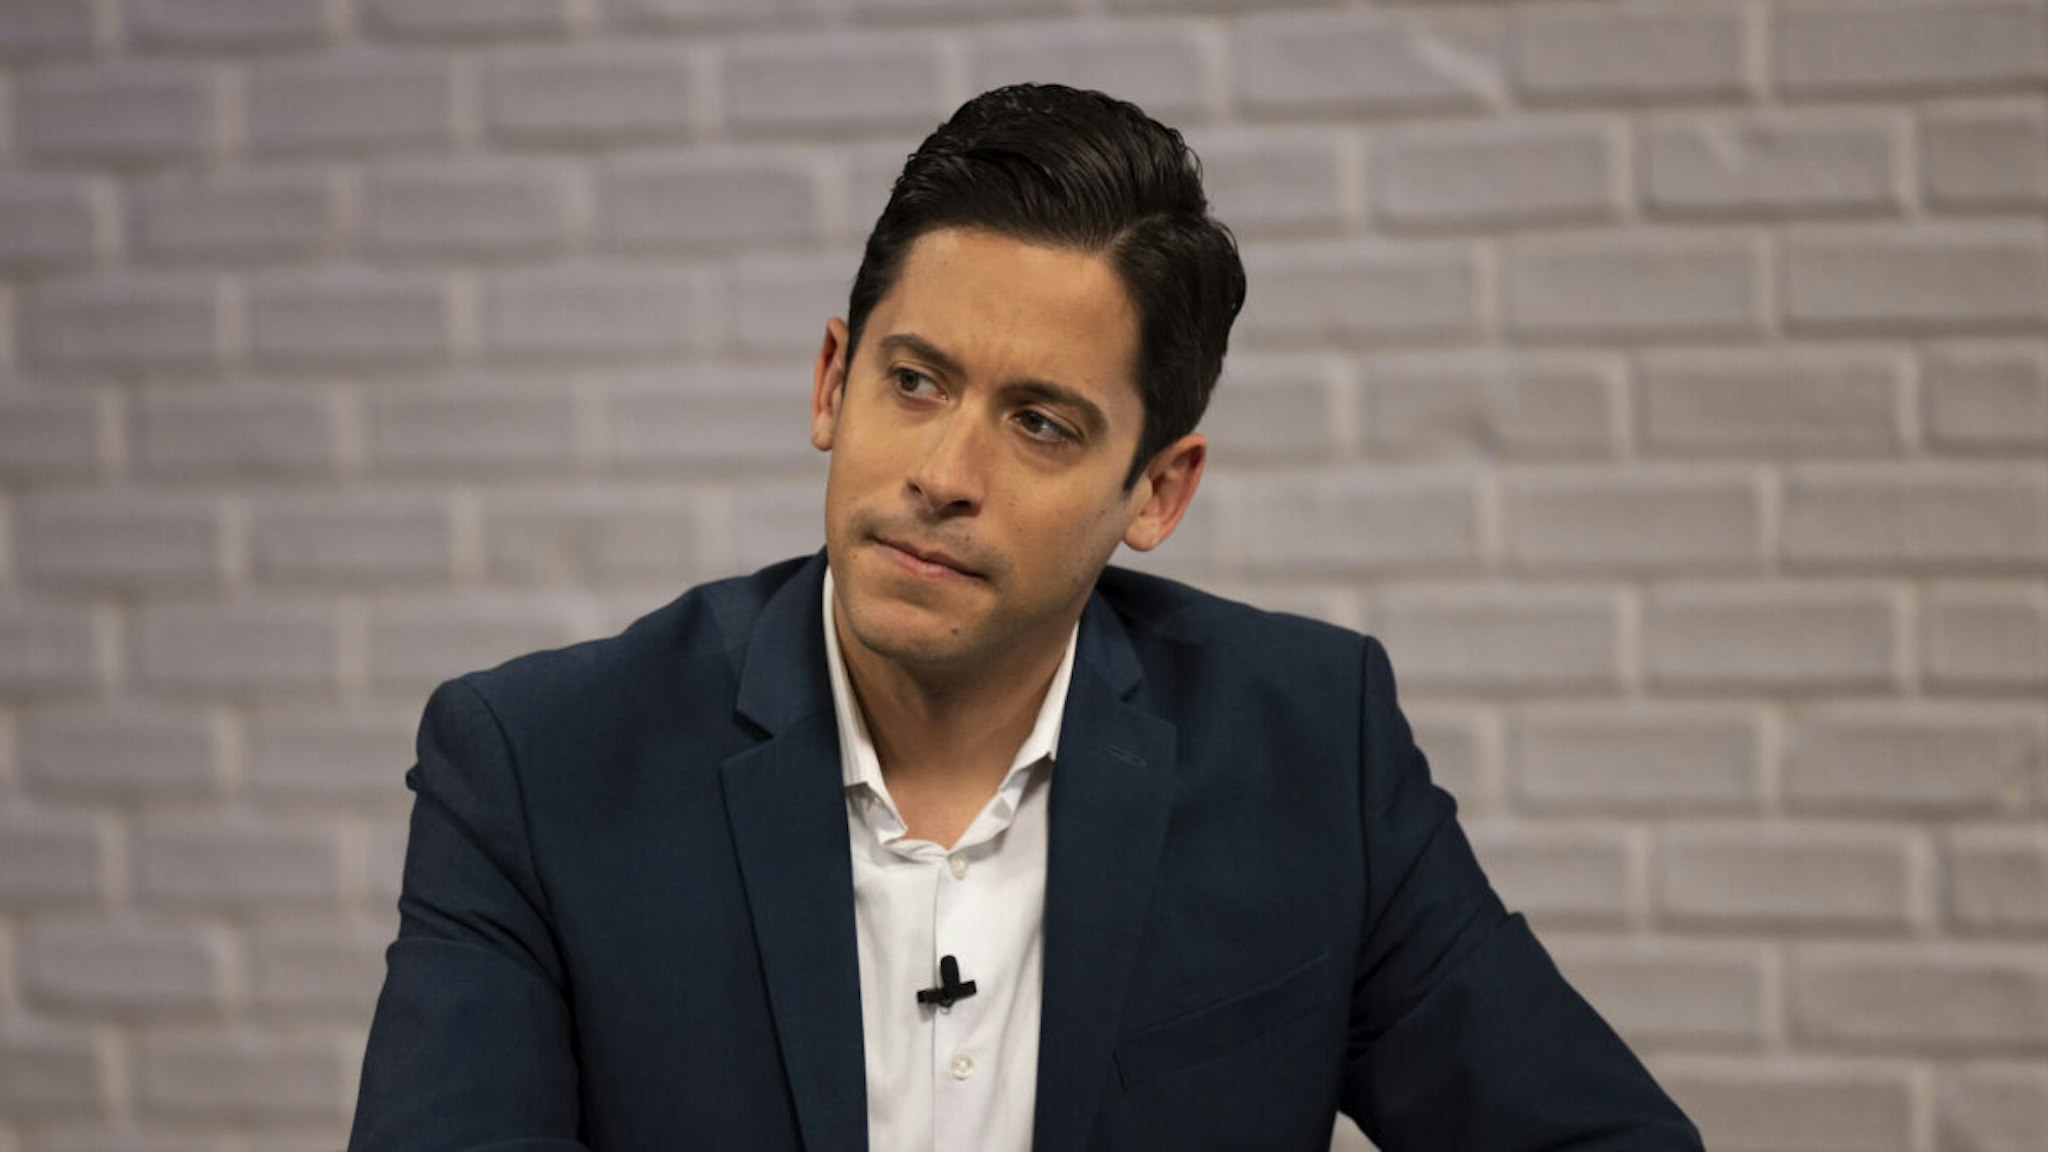 Michael Knowles appears as a guest during a taping of "Candace" hosted by Candace Owens on October 8, 2021 in Nashville, Tennessee